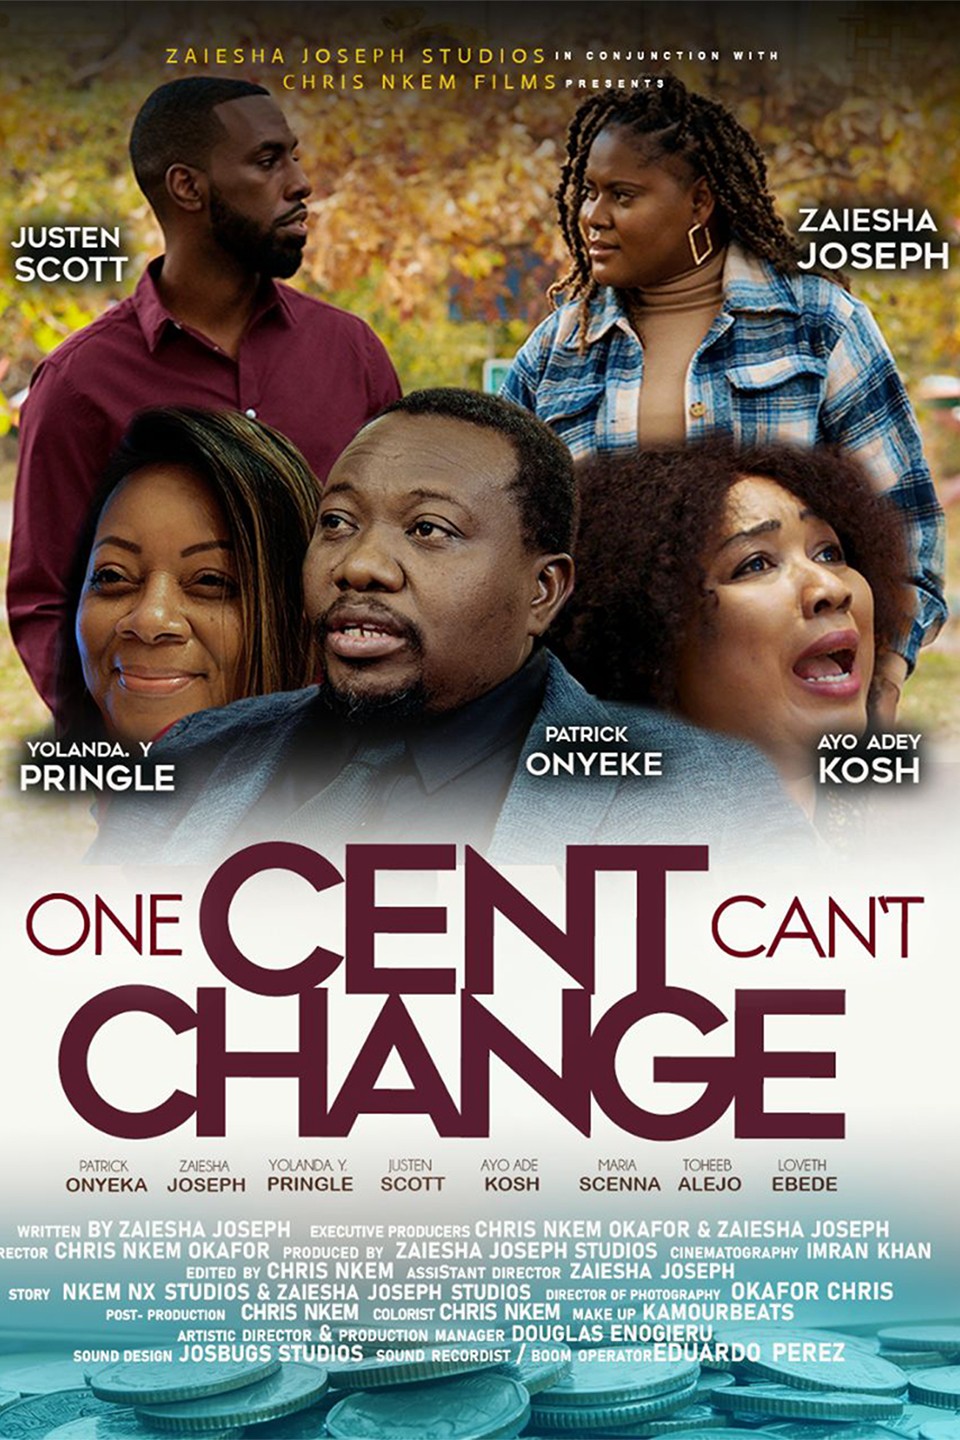 One Cent Can't Change | Rotten Tomatoes